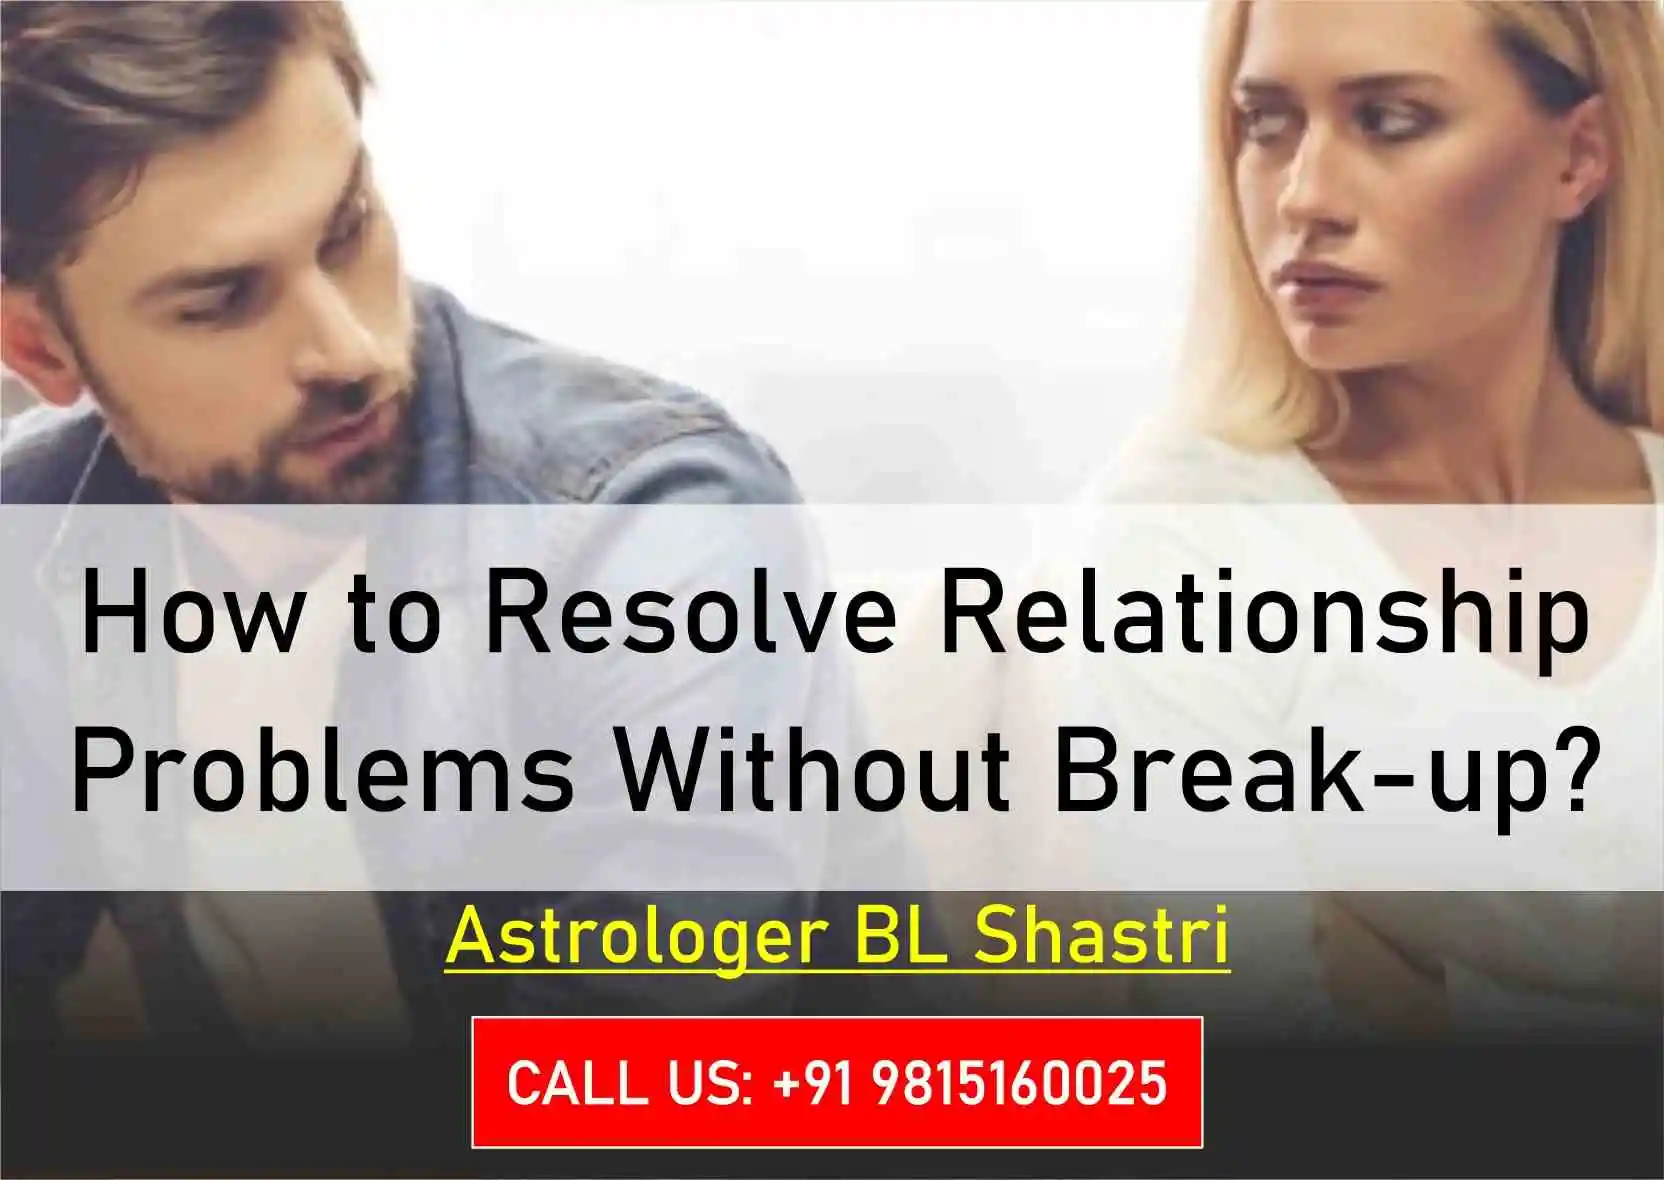 How To Resolve Relationship Problems Without Break-Up?